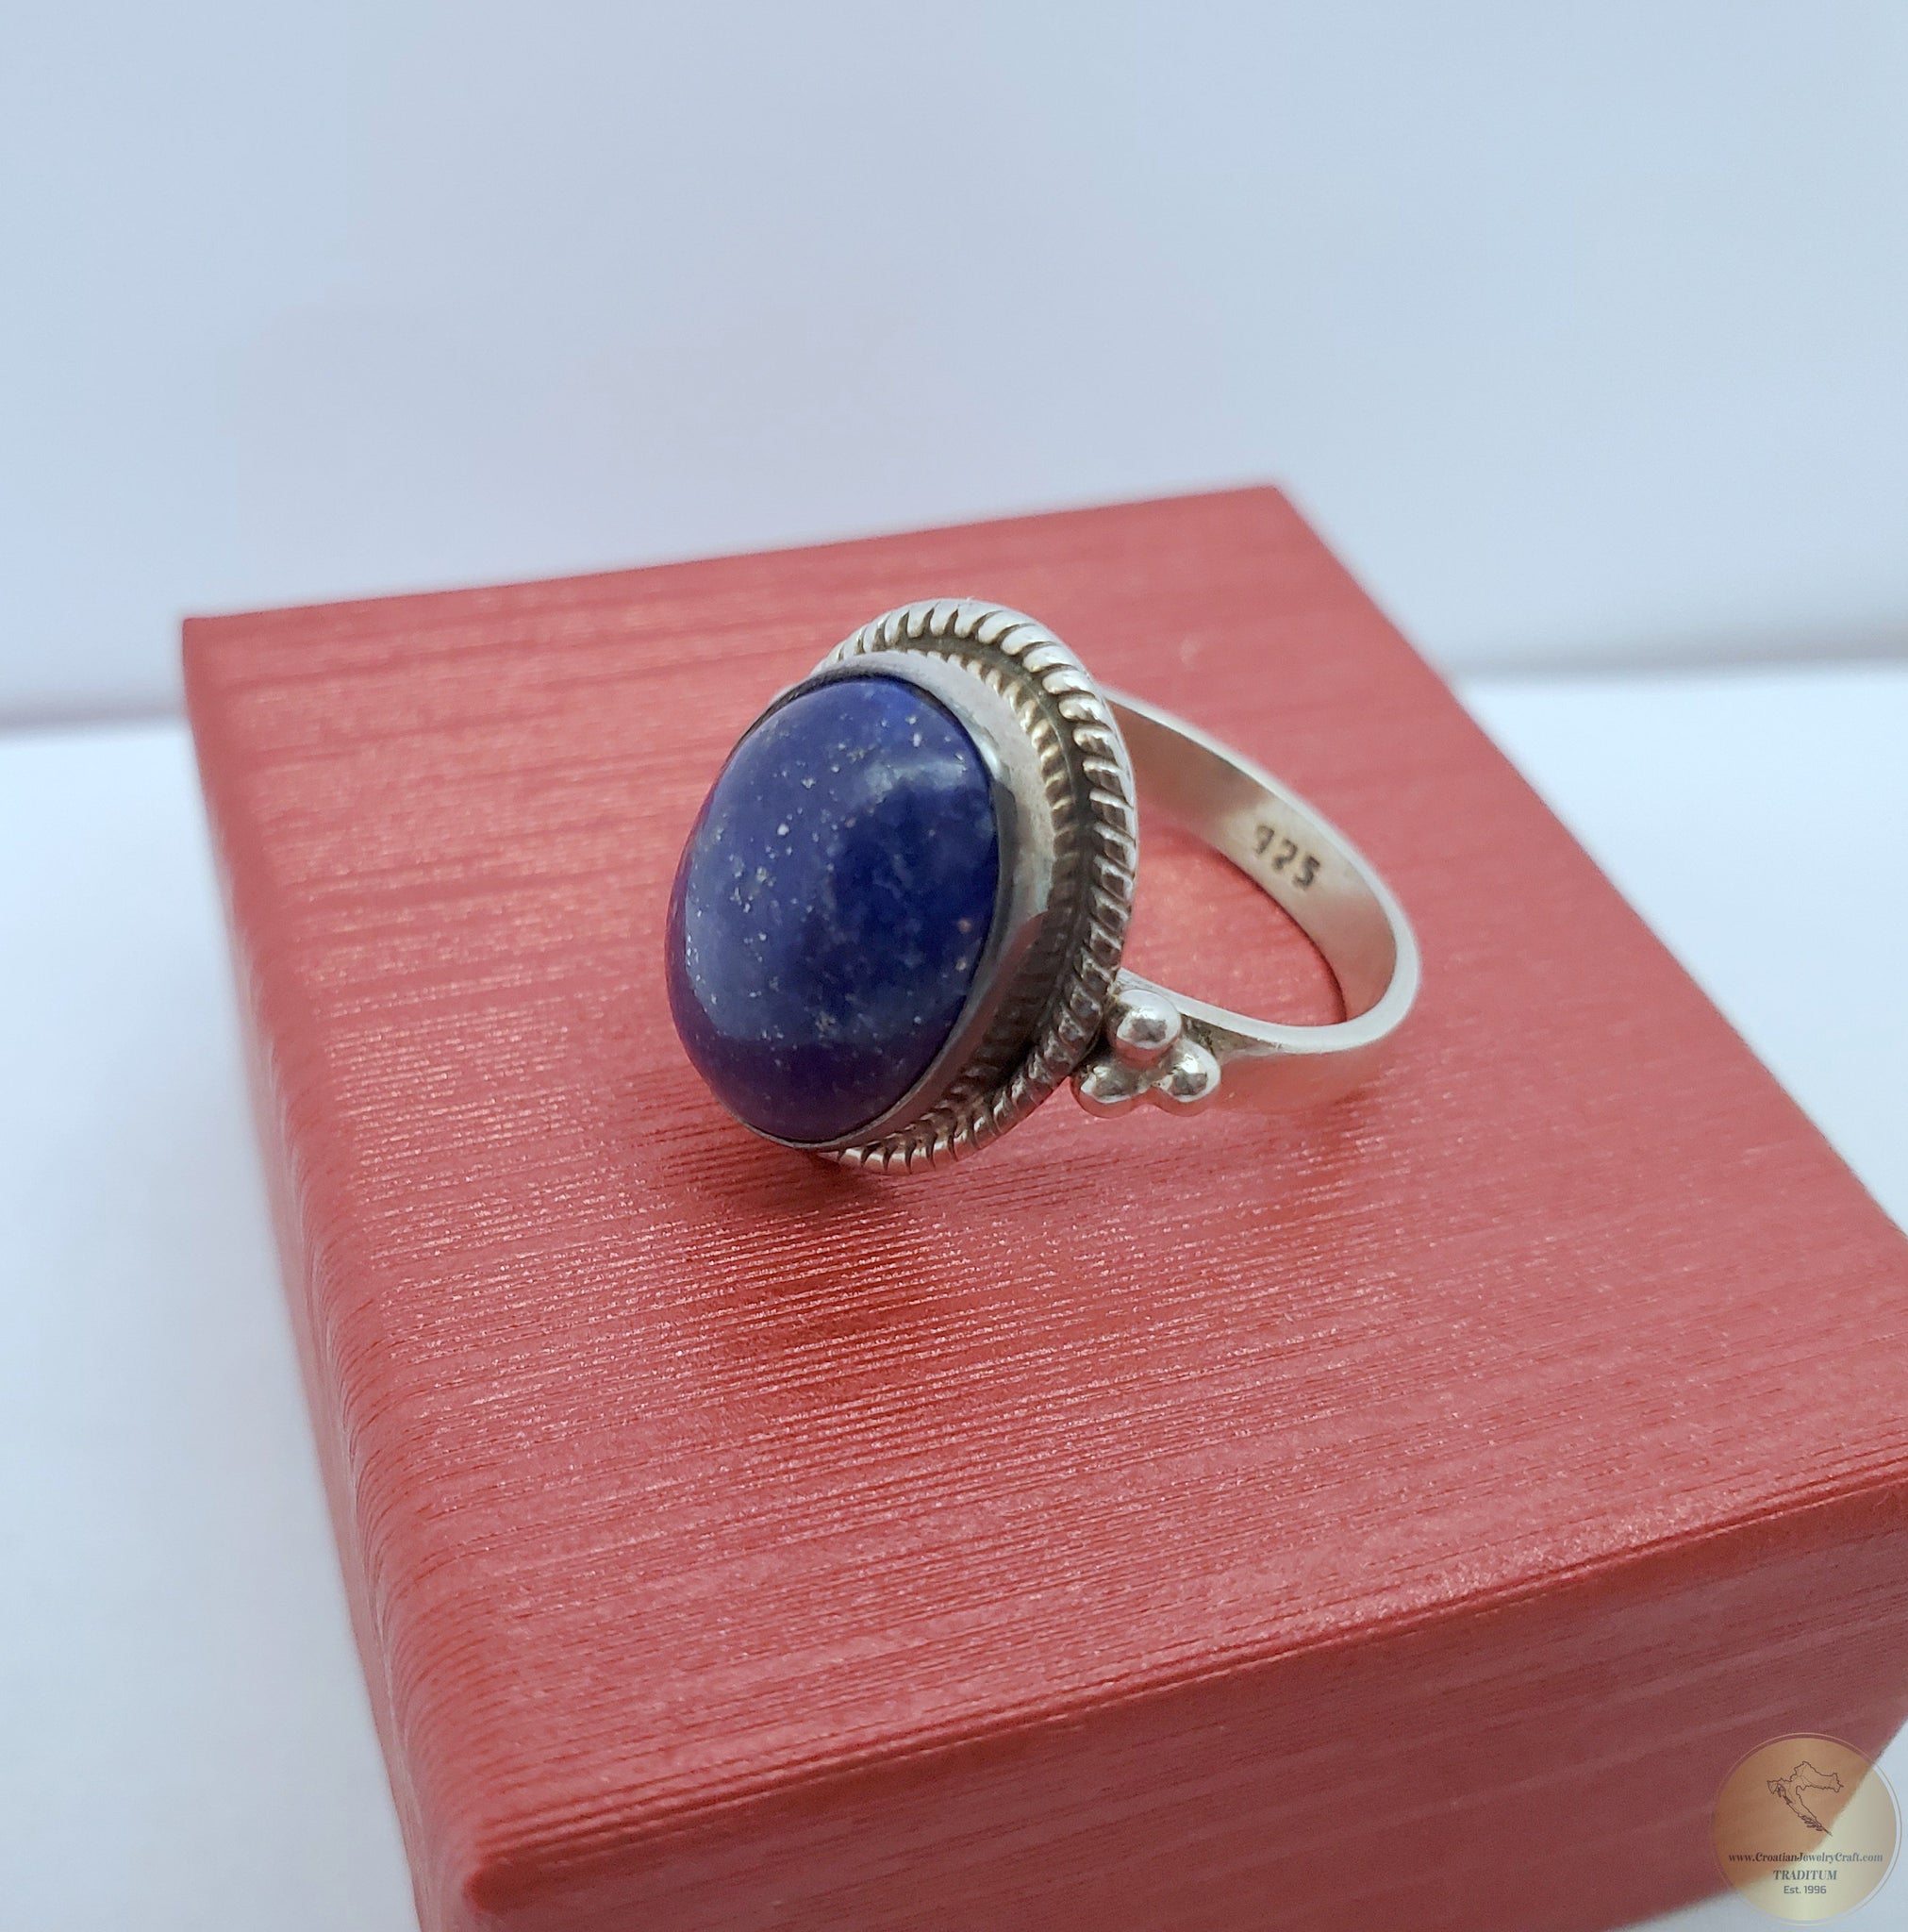 10K White Gold Blue Stone Cocktail Ring Four Leaf Clover Design Sze 5.5 -  Colonial Trading Company